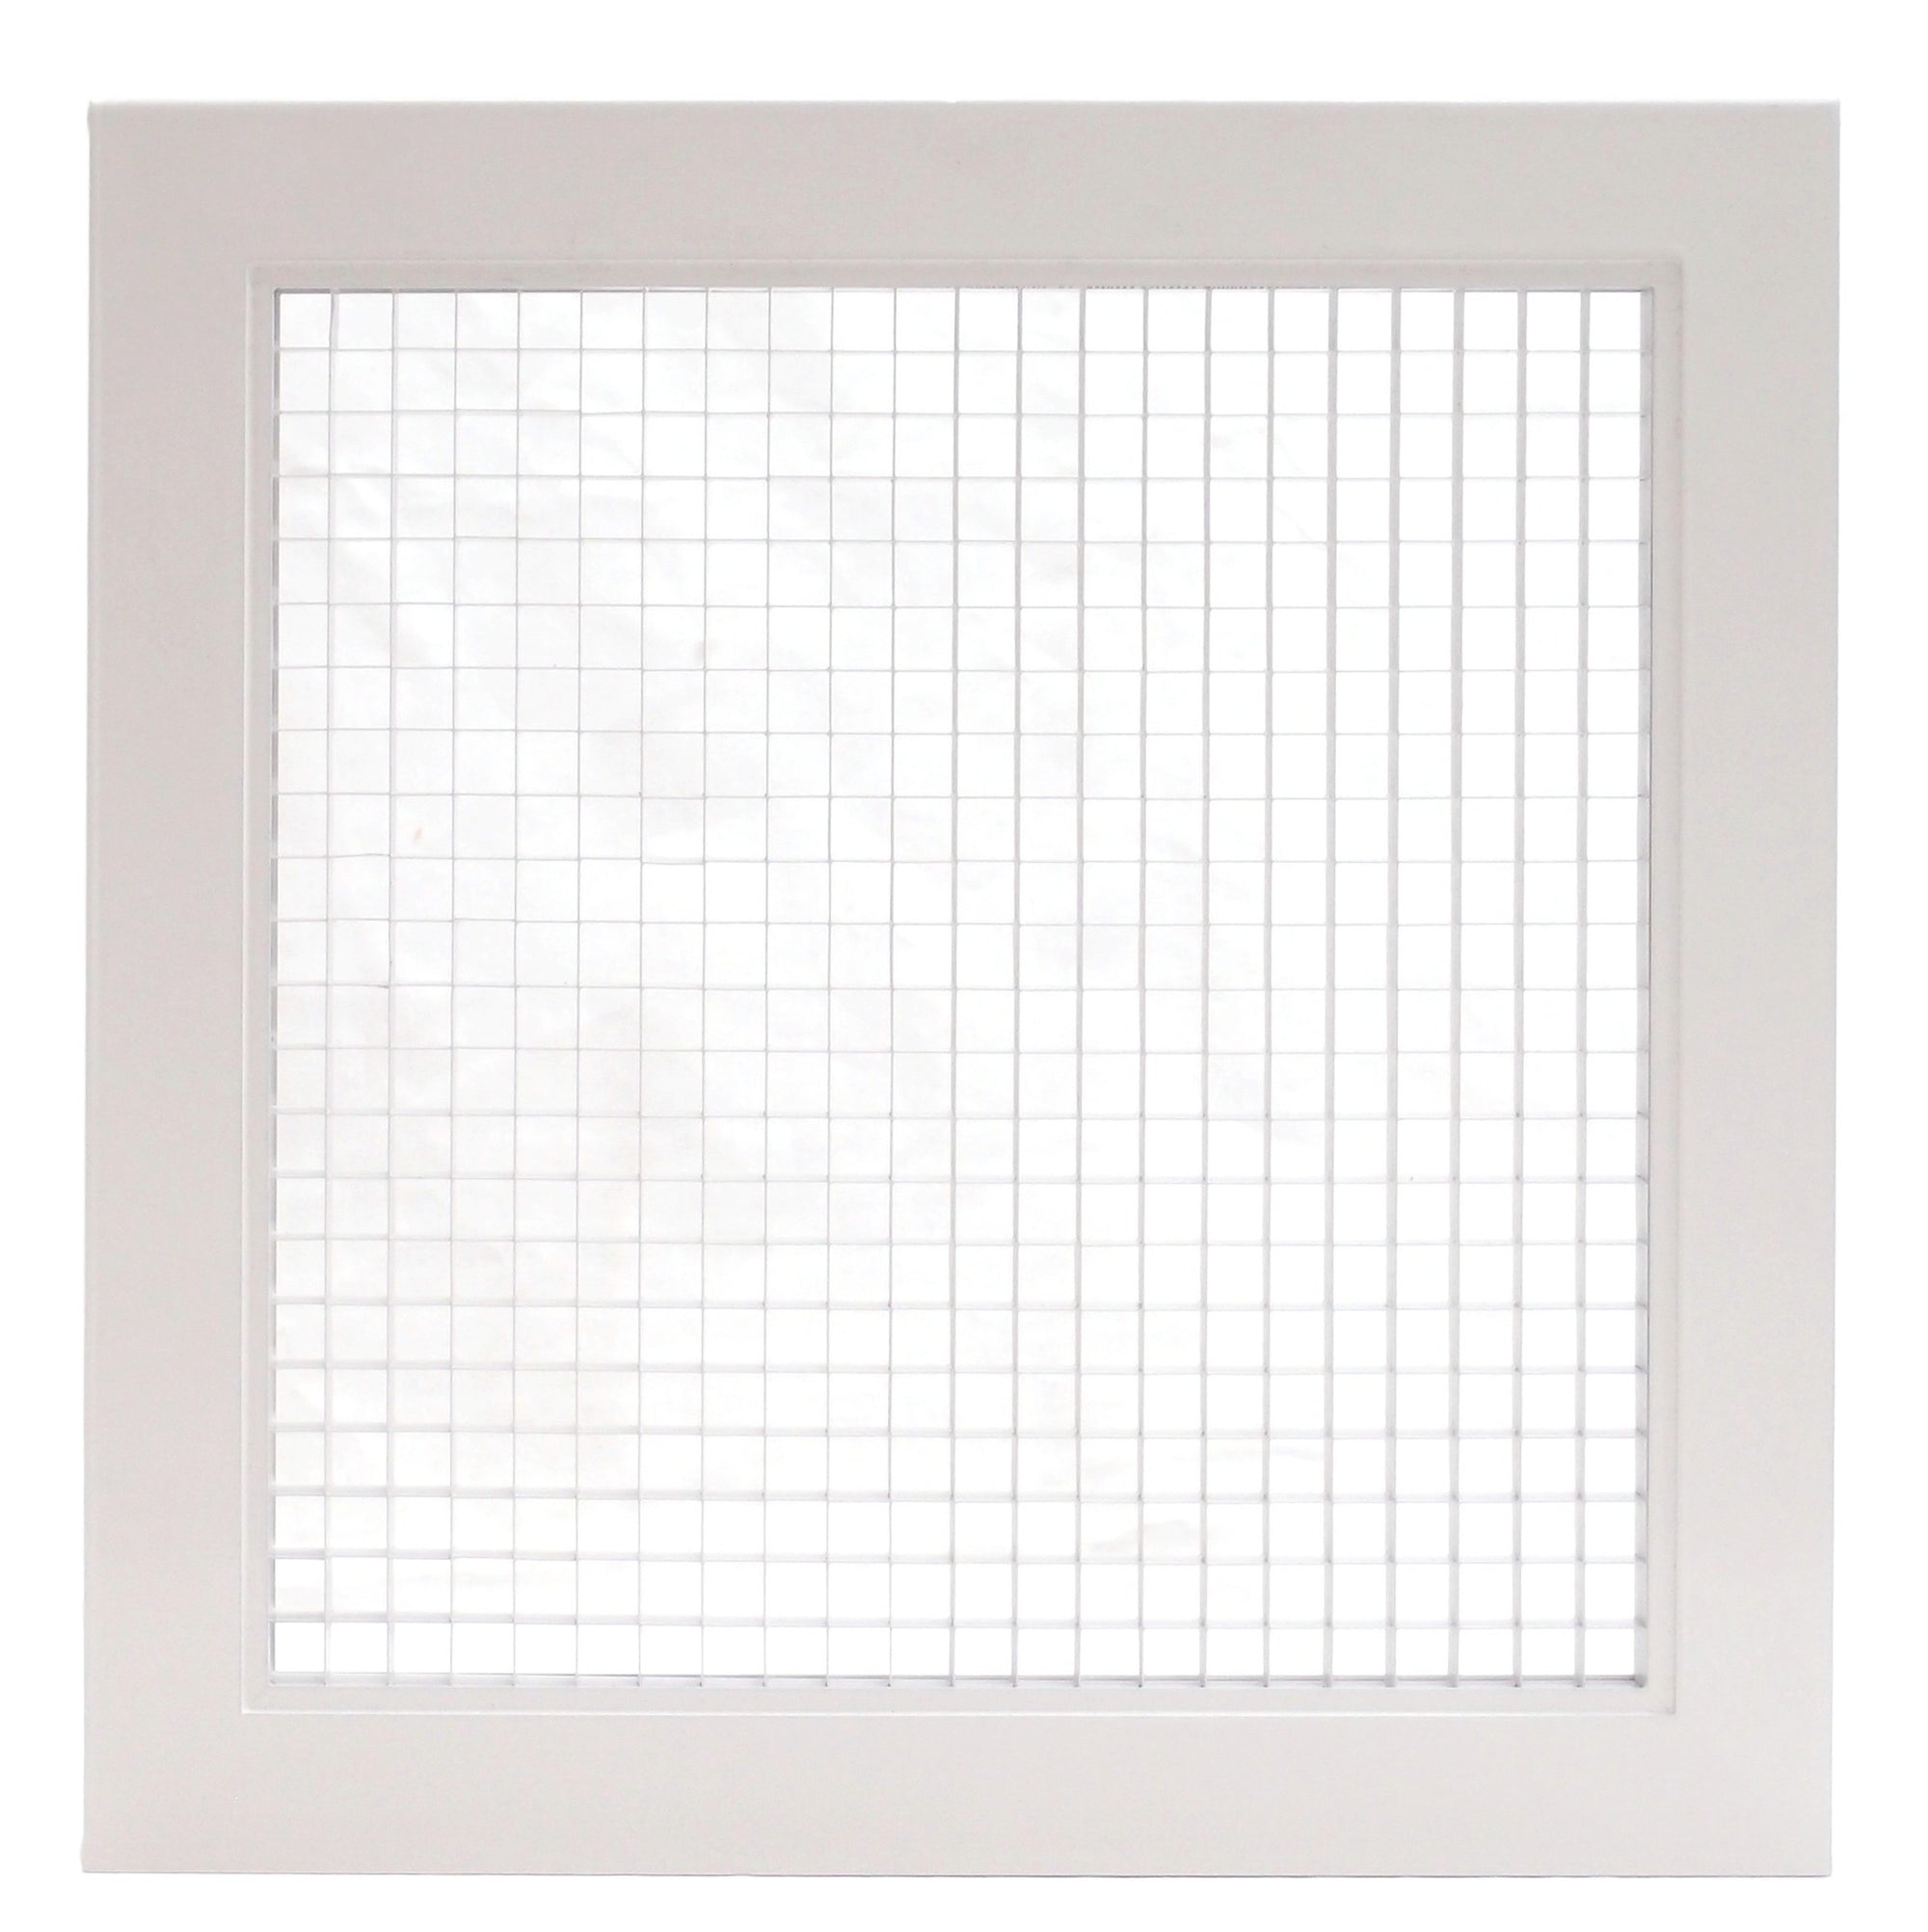 34" x 12" Cube Core Eggcrate Return Air Filter Grille for 1" Filter